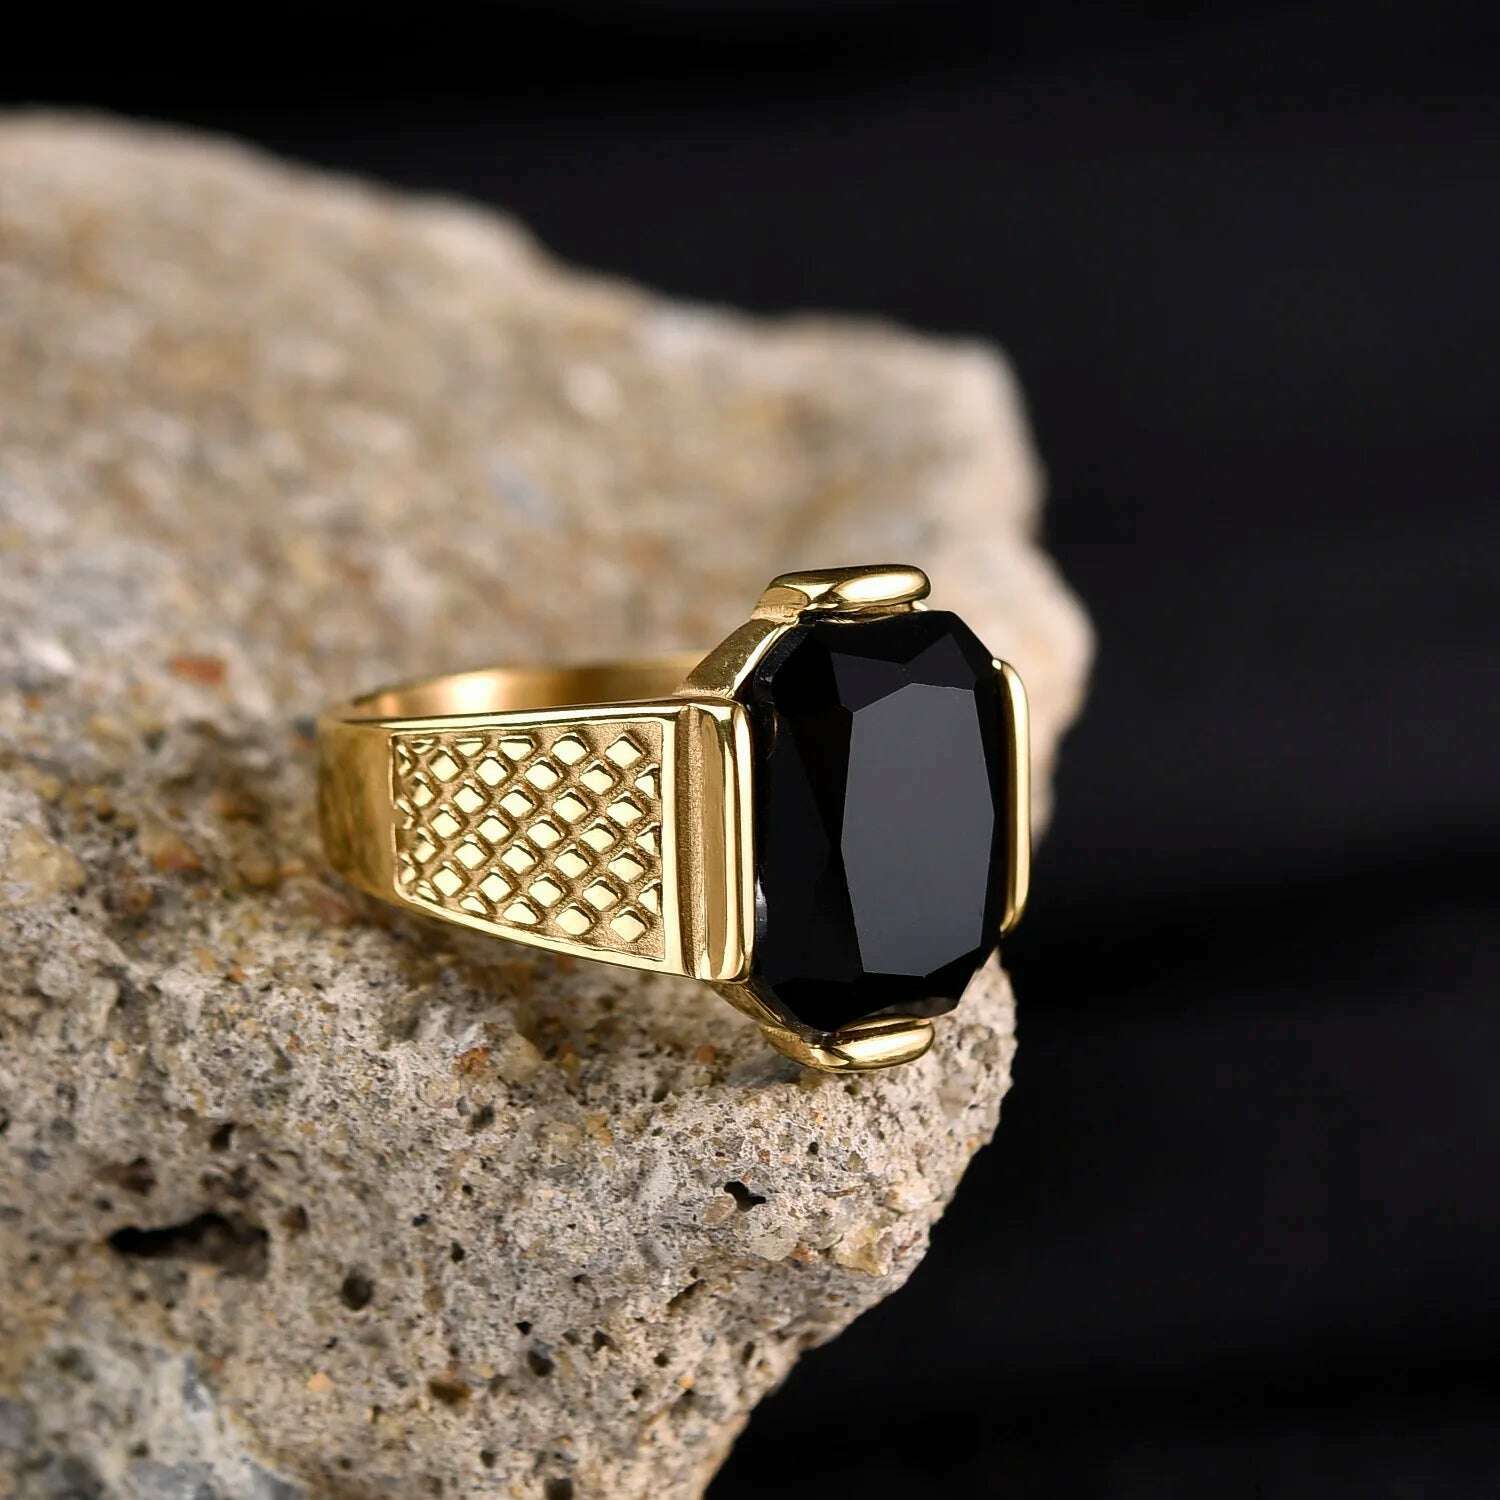 Men's High Quality Vintage Stainless Steel Gemstone Styles 18K Gold Plated Ring Jewelry Professional Factory Made, Black / 8, KIMLUD Women's Clothes